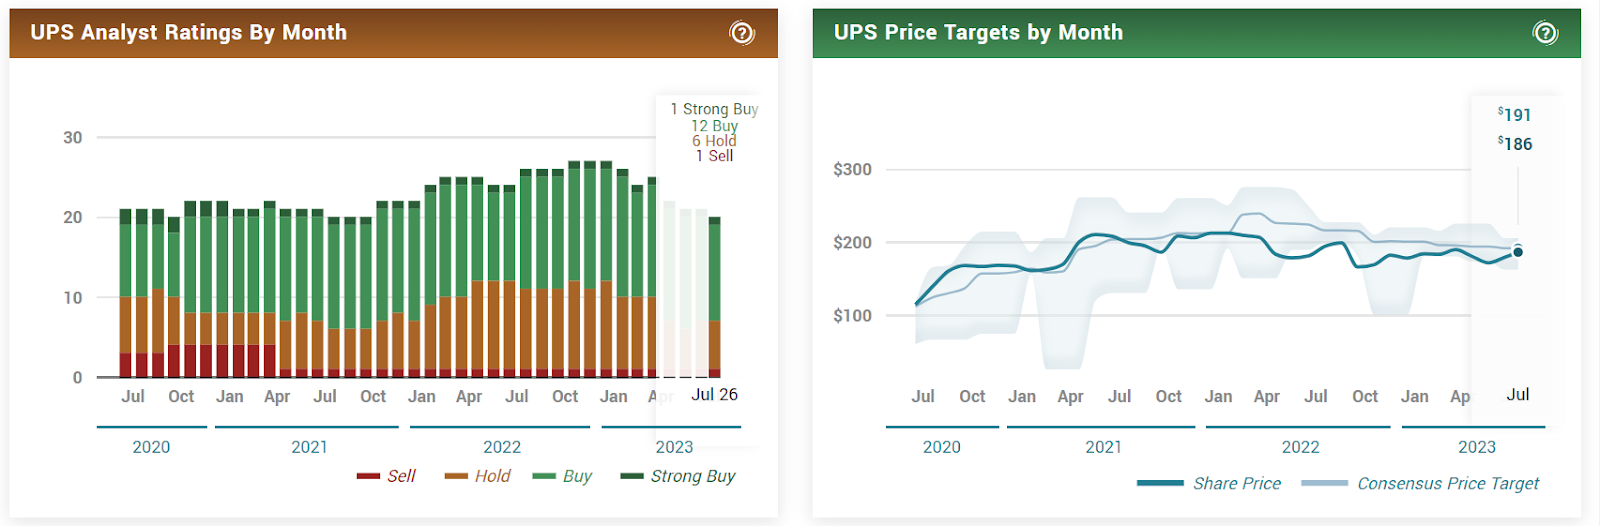 United Parcel Service (UPS) Stock: Teamster Deal Avoided Strike